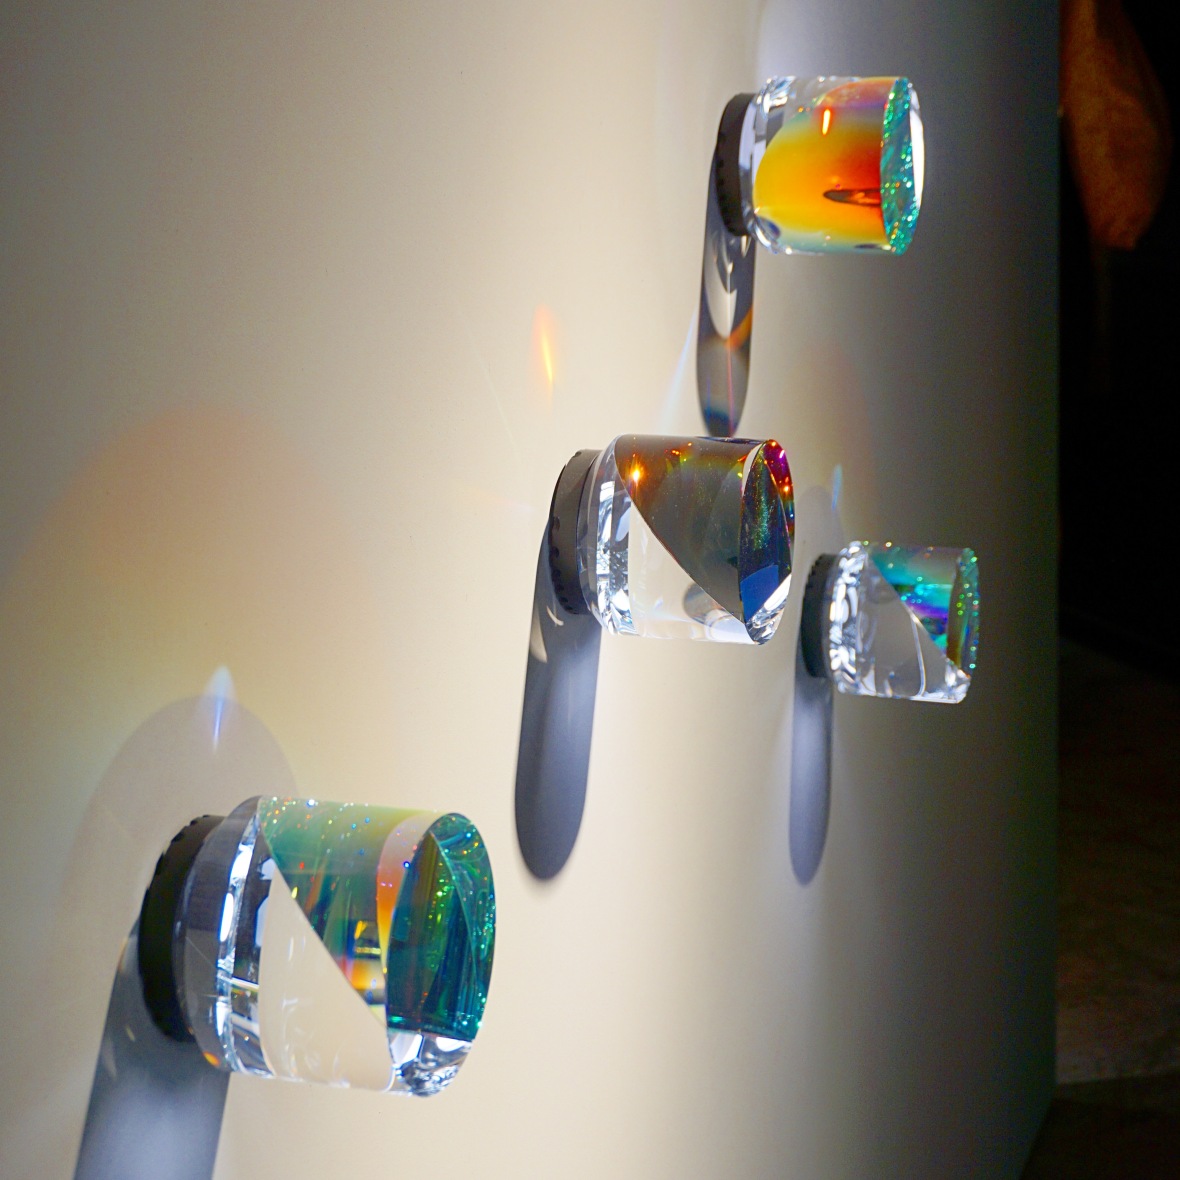 Tomás Alonso, one of the Swarovski Designers of the Future, showing his 47° project.